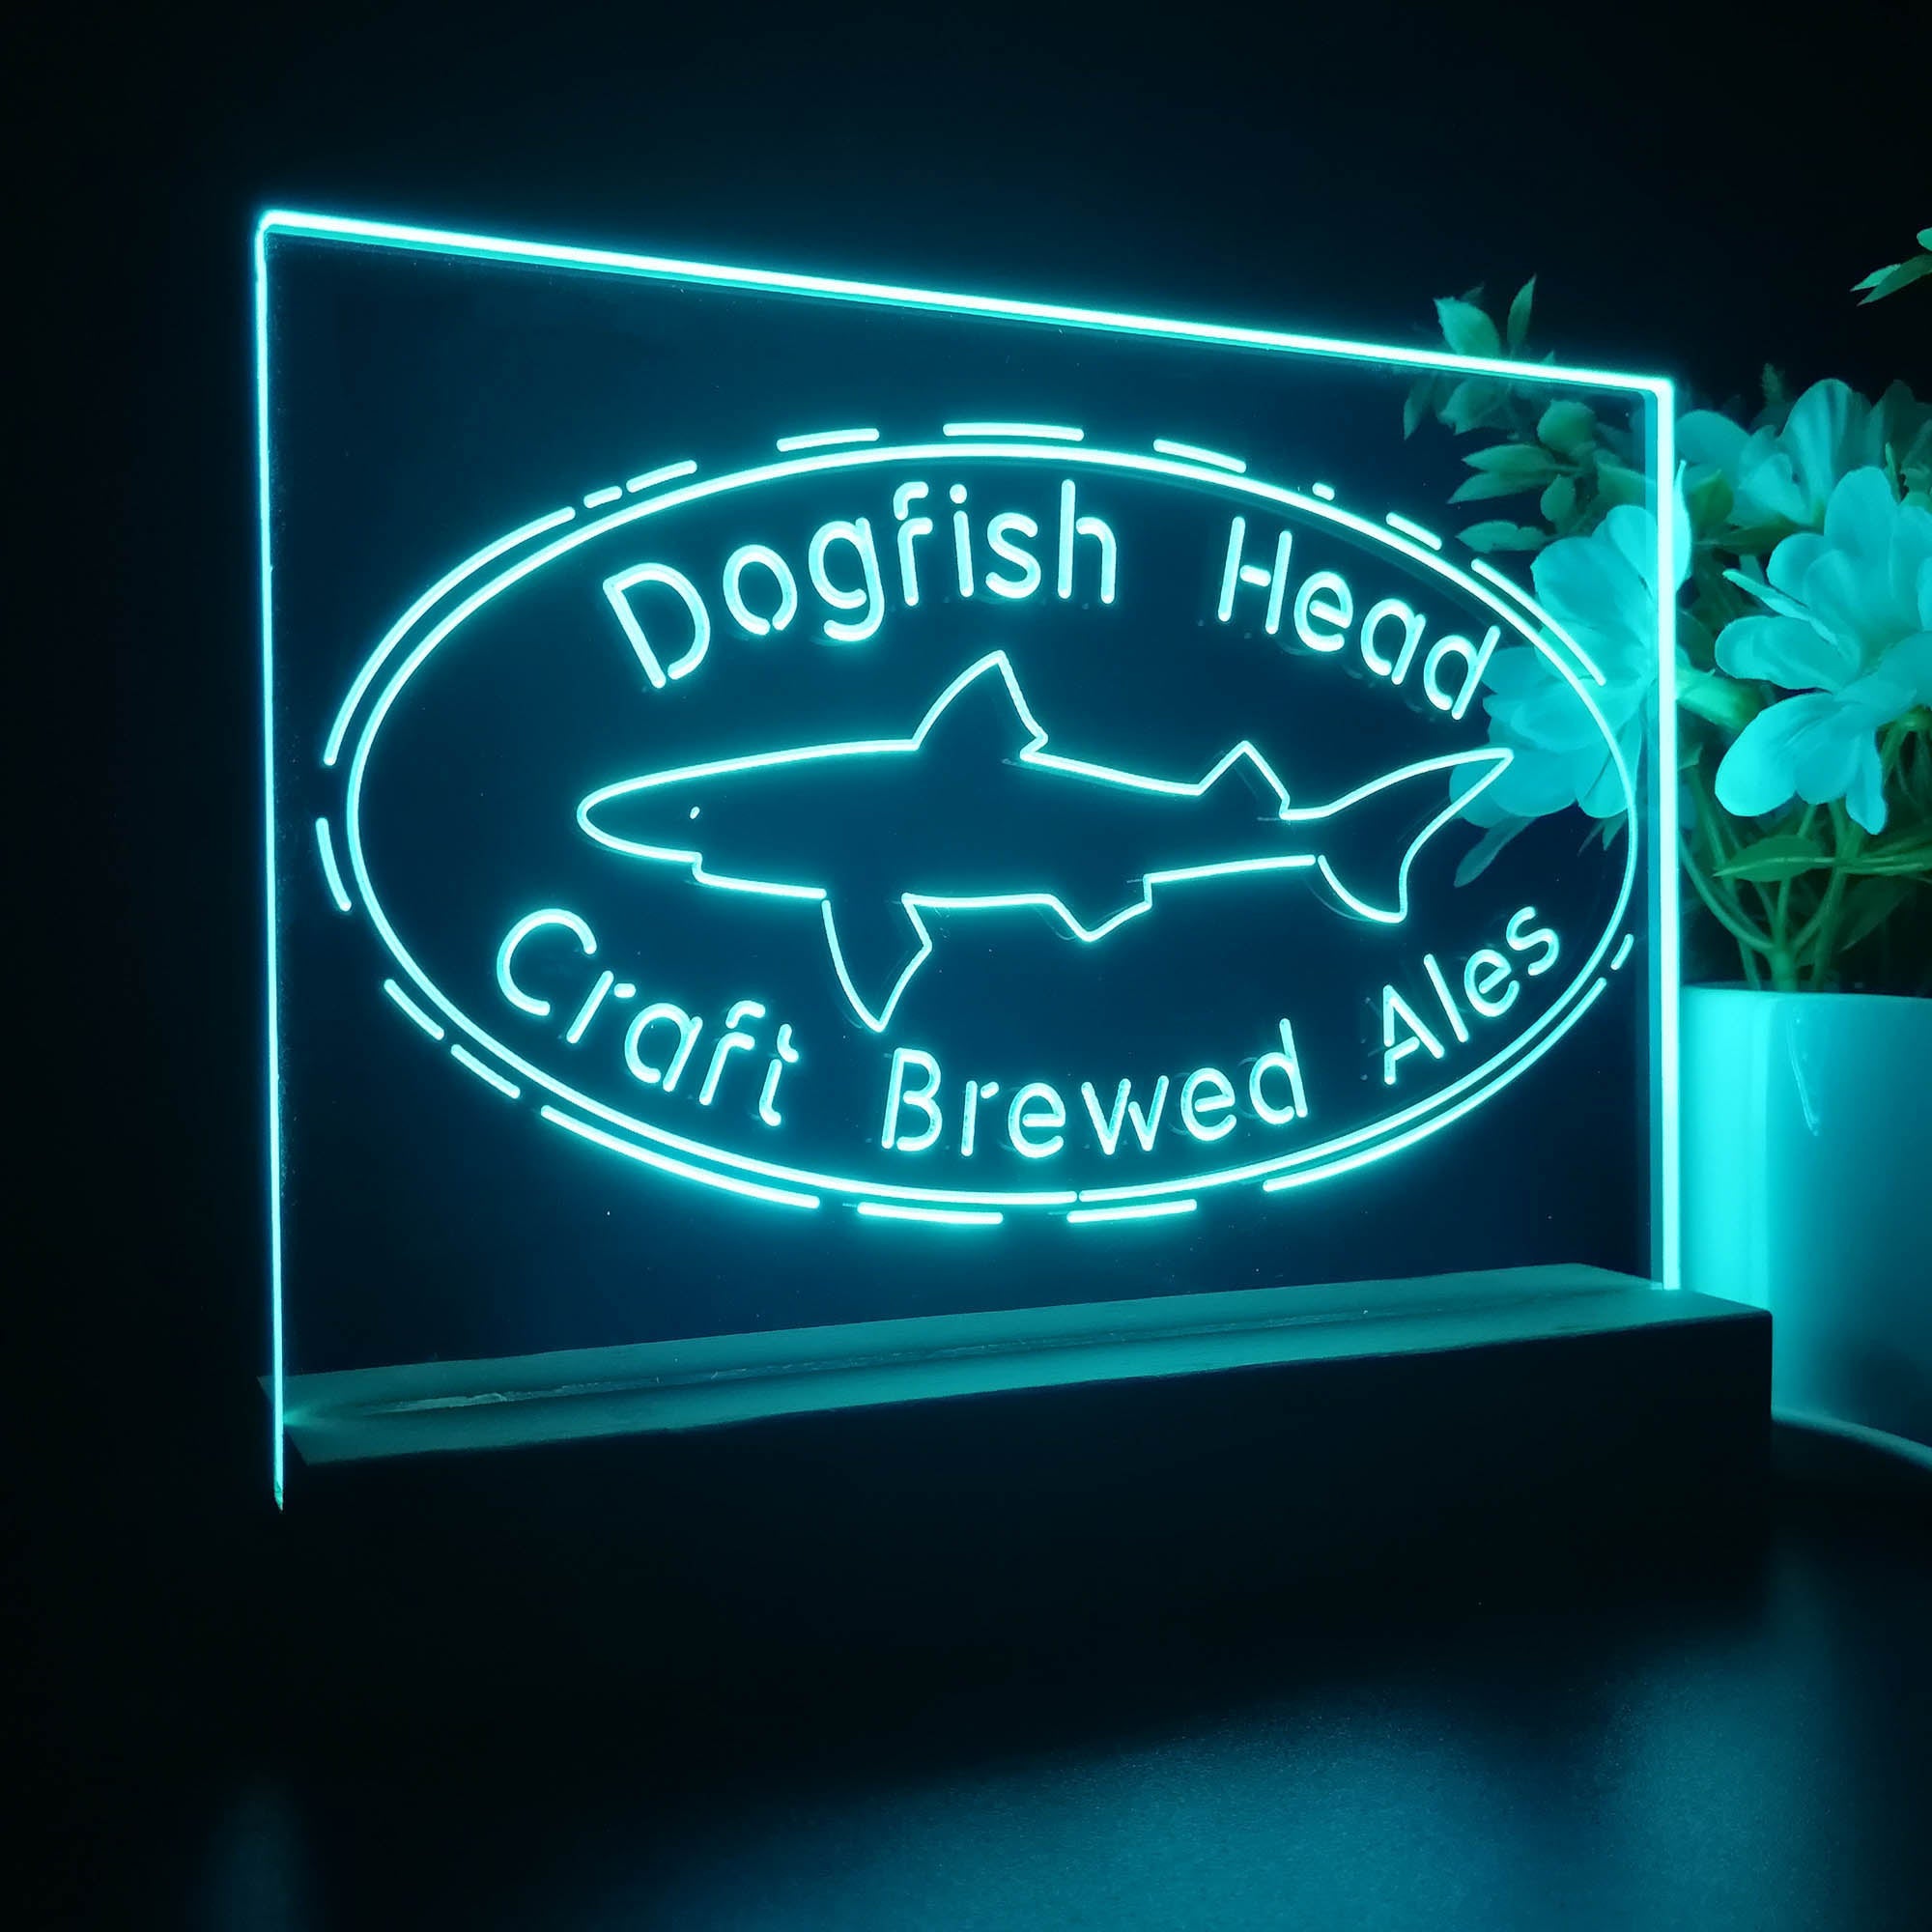 Dogfishs Heads Craft Brewery Neon Sign Pub Bar Decor Lamp